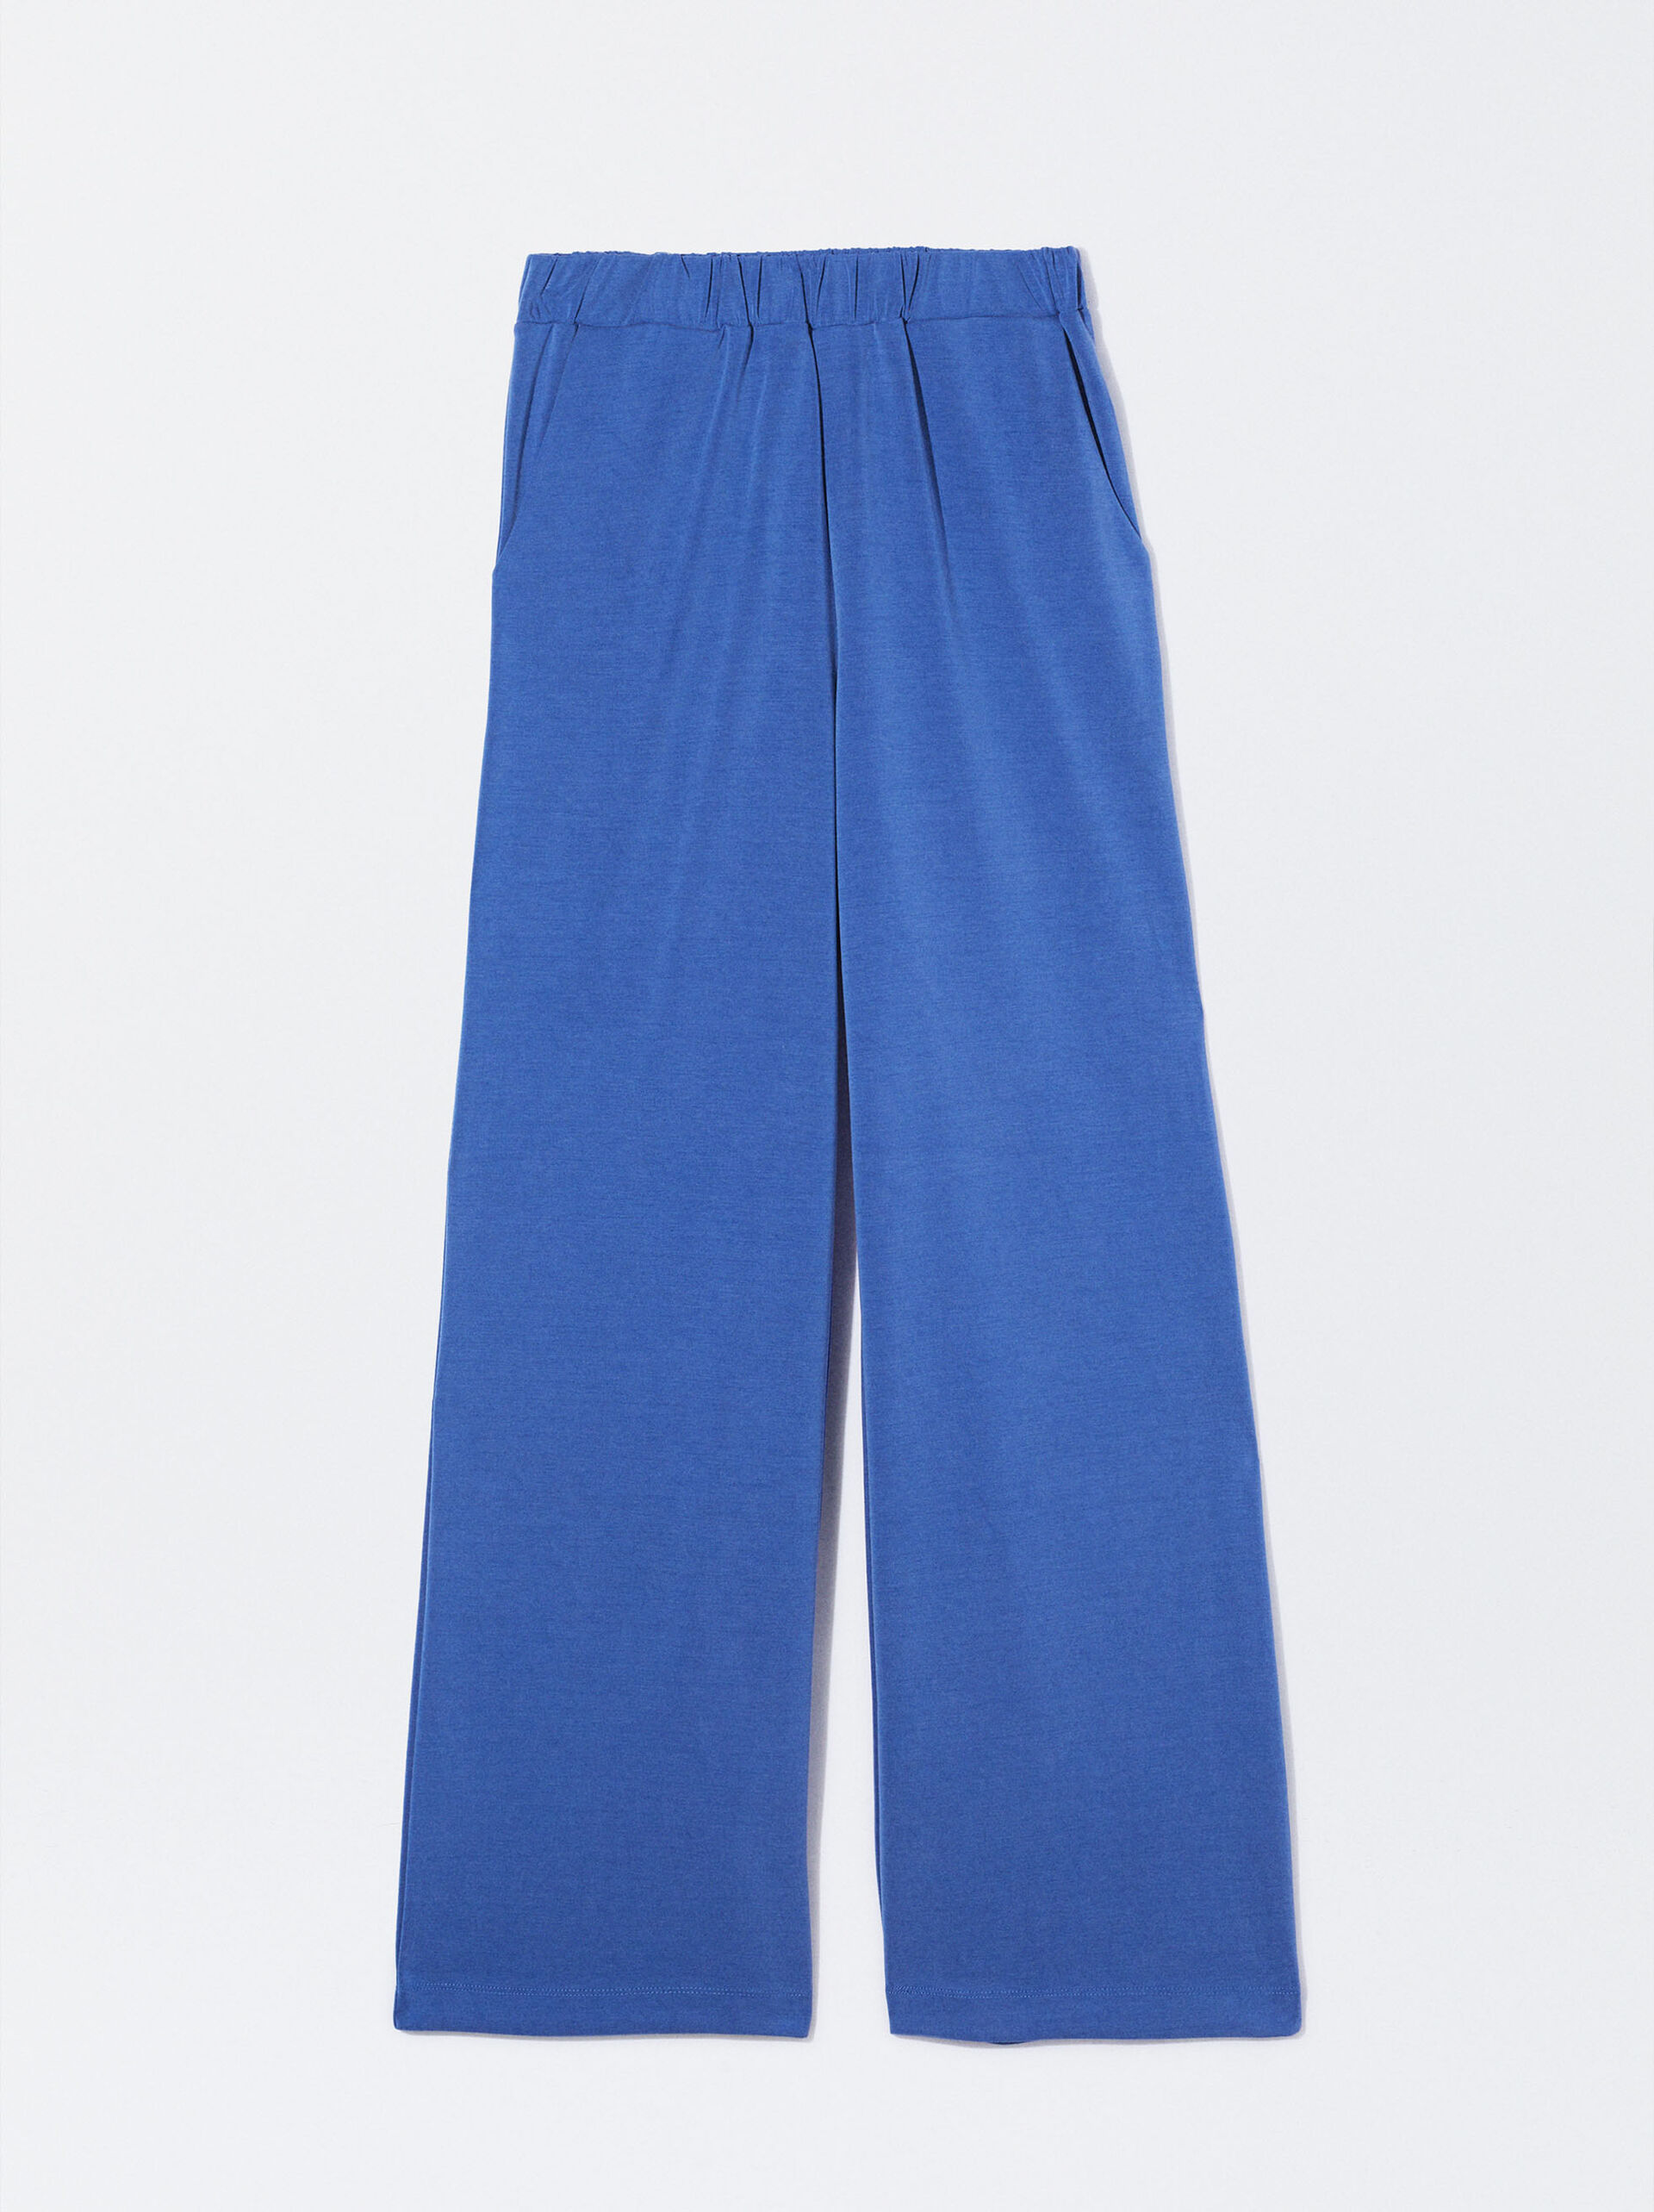 Loose-Fitting Trousers With Elastic Waistband image number 5.0